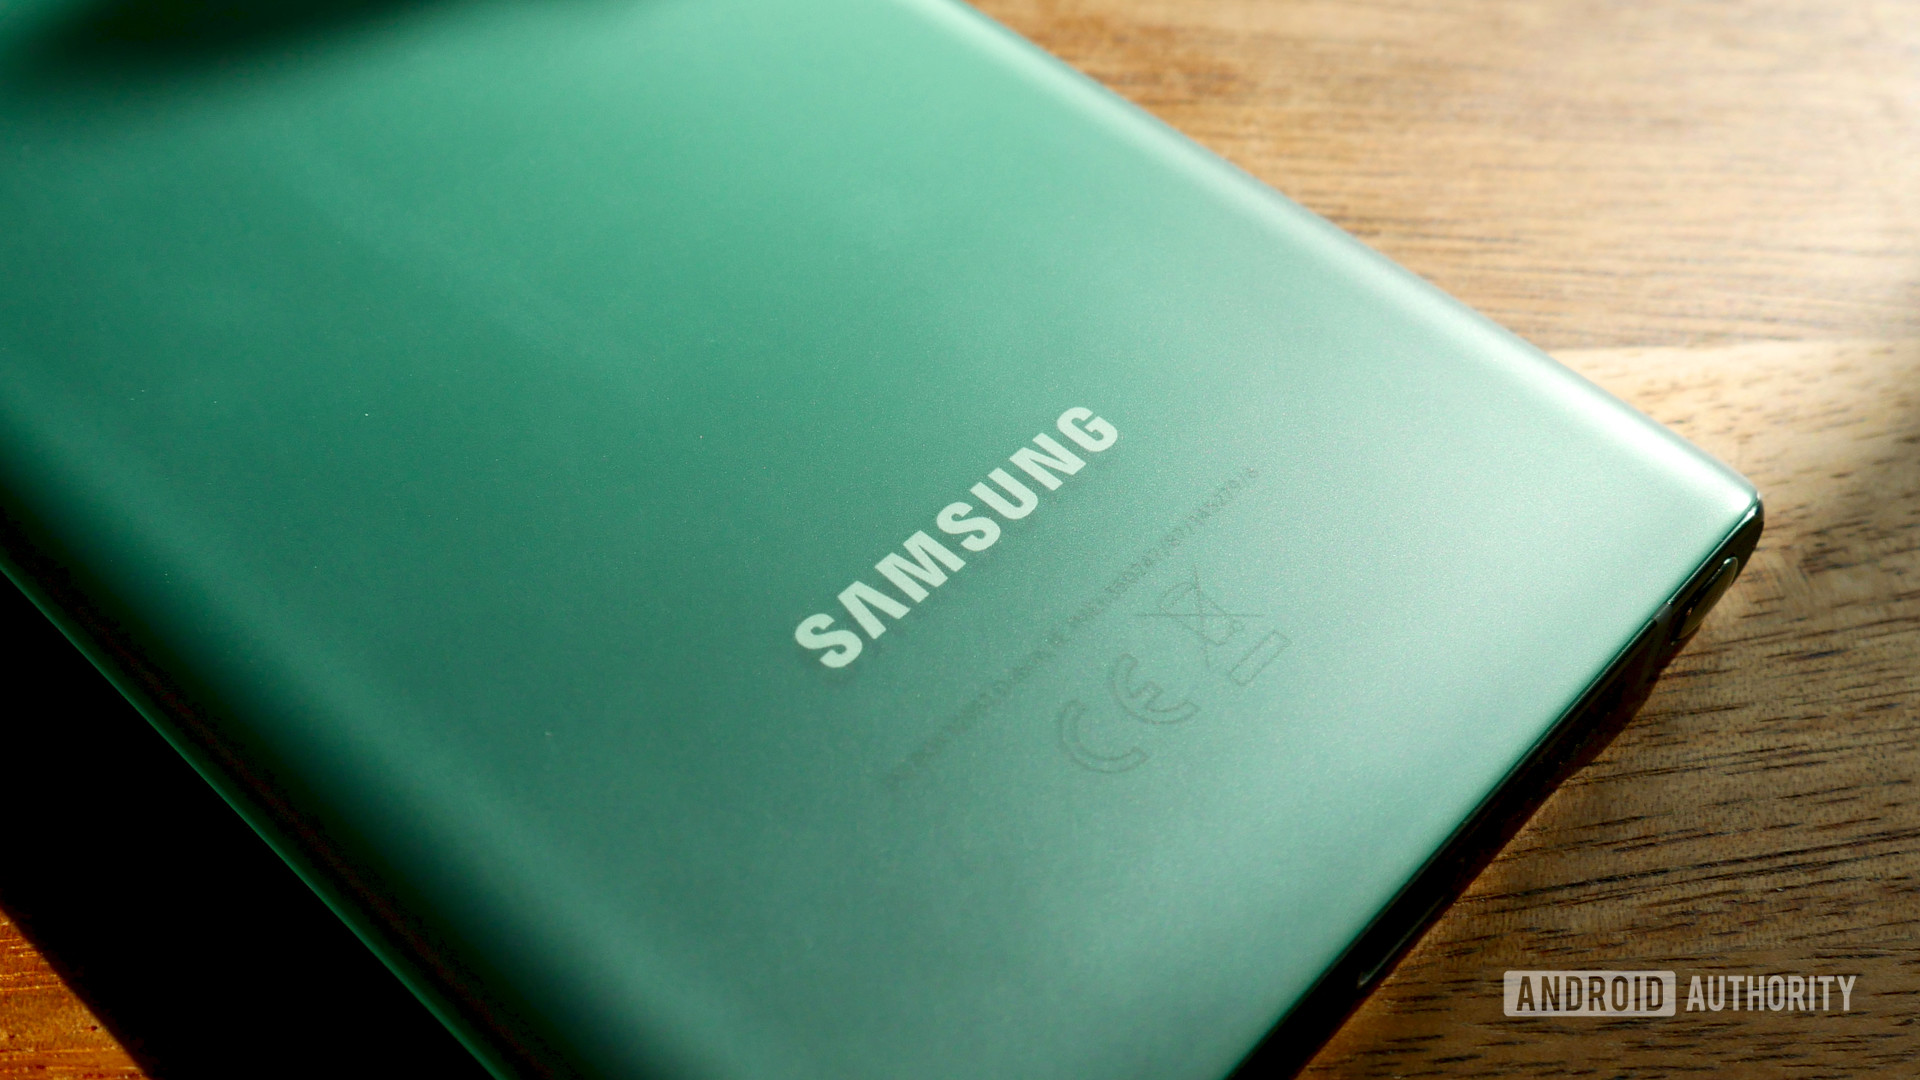 Samsung updates for devices just extended to 4 years - Android Authority